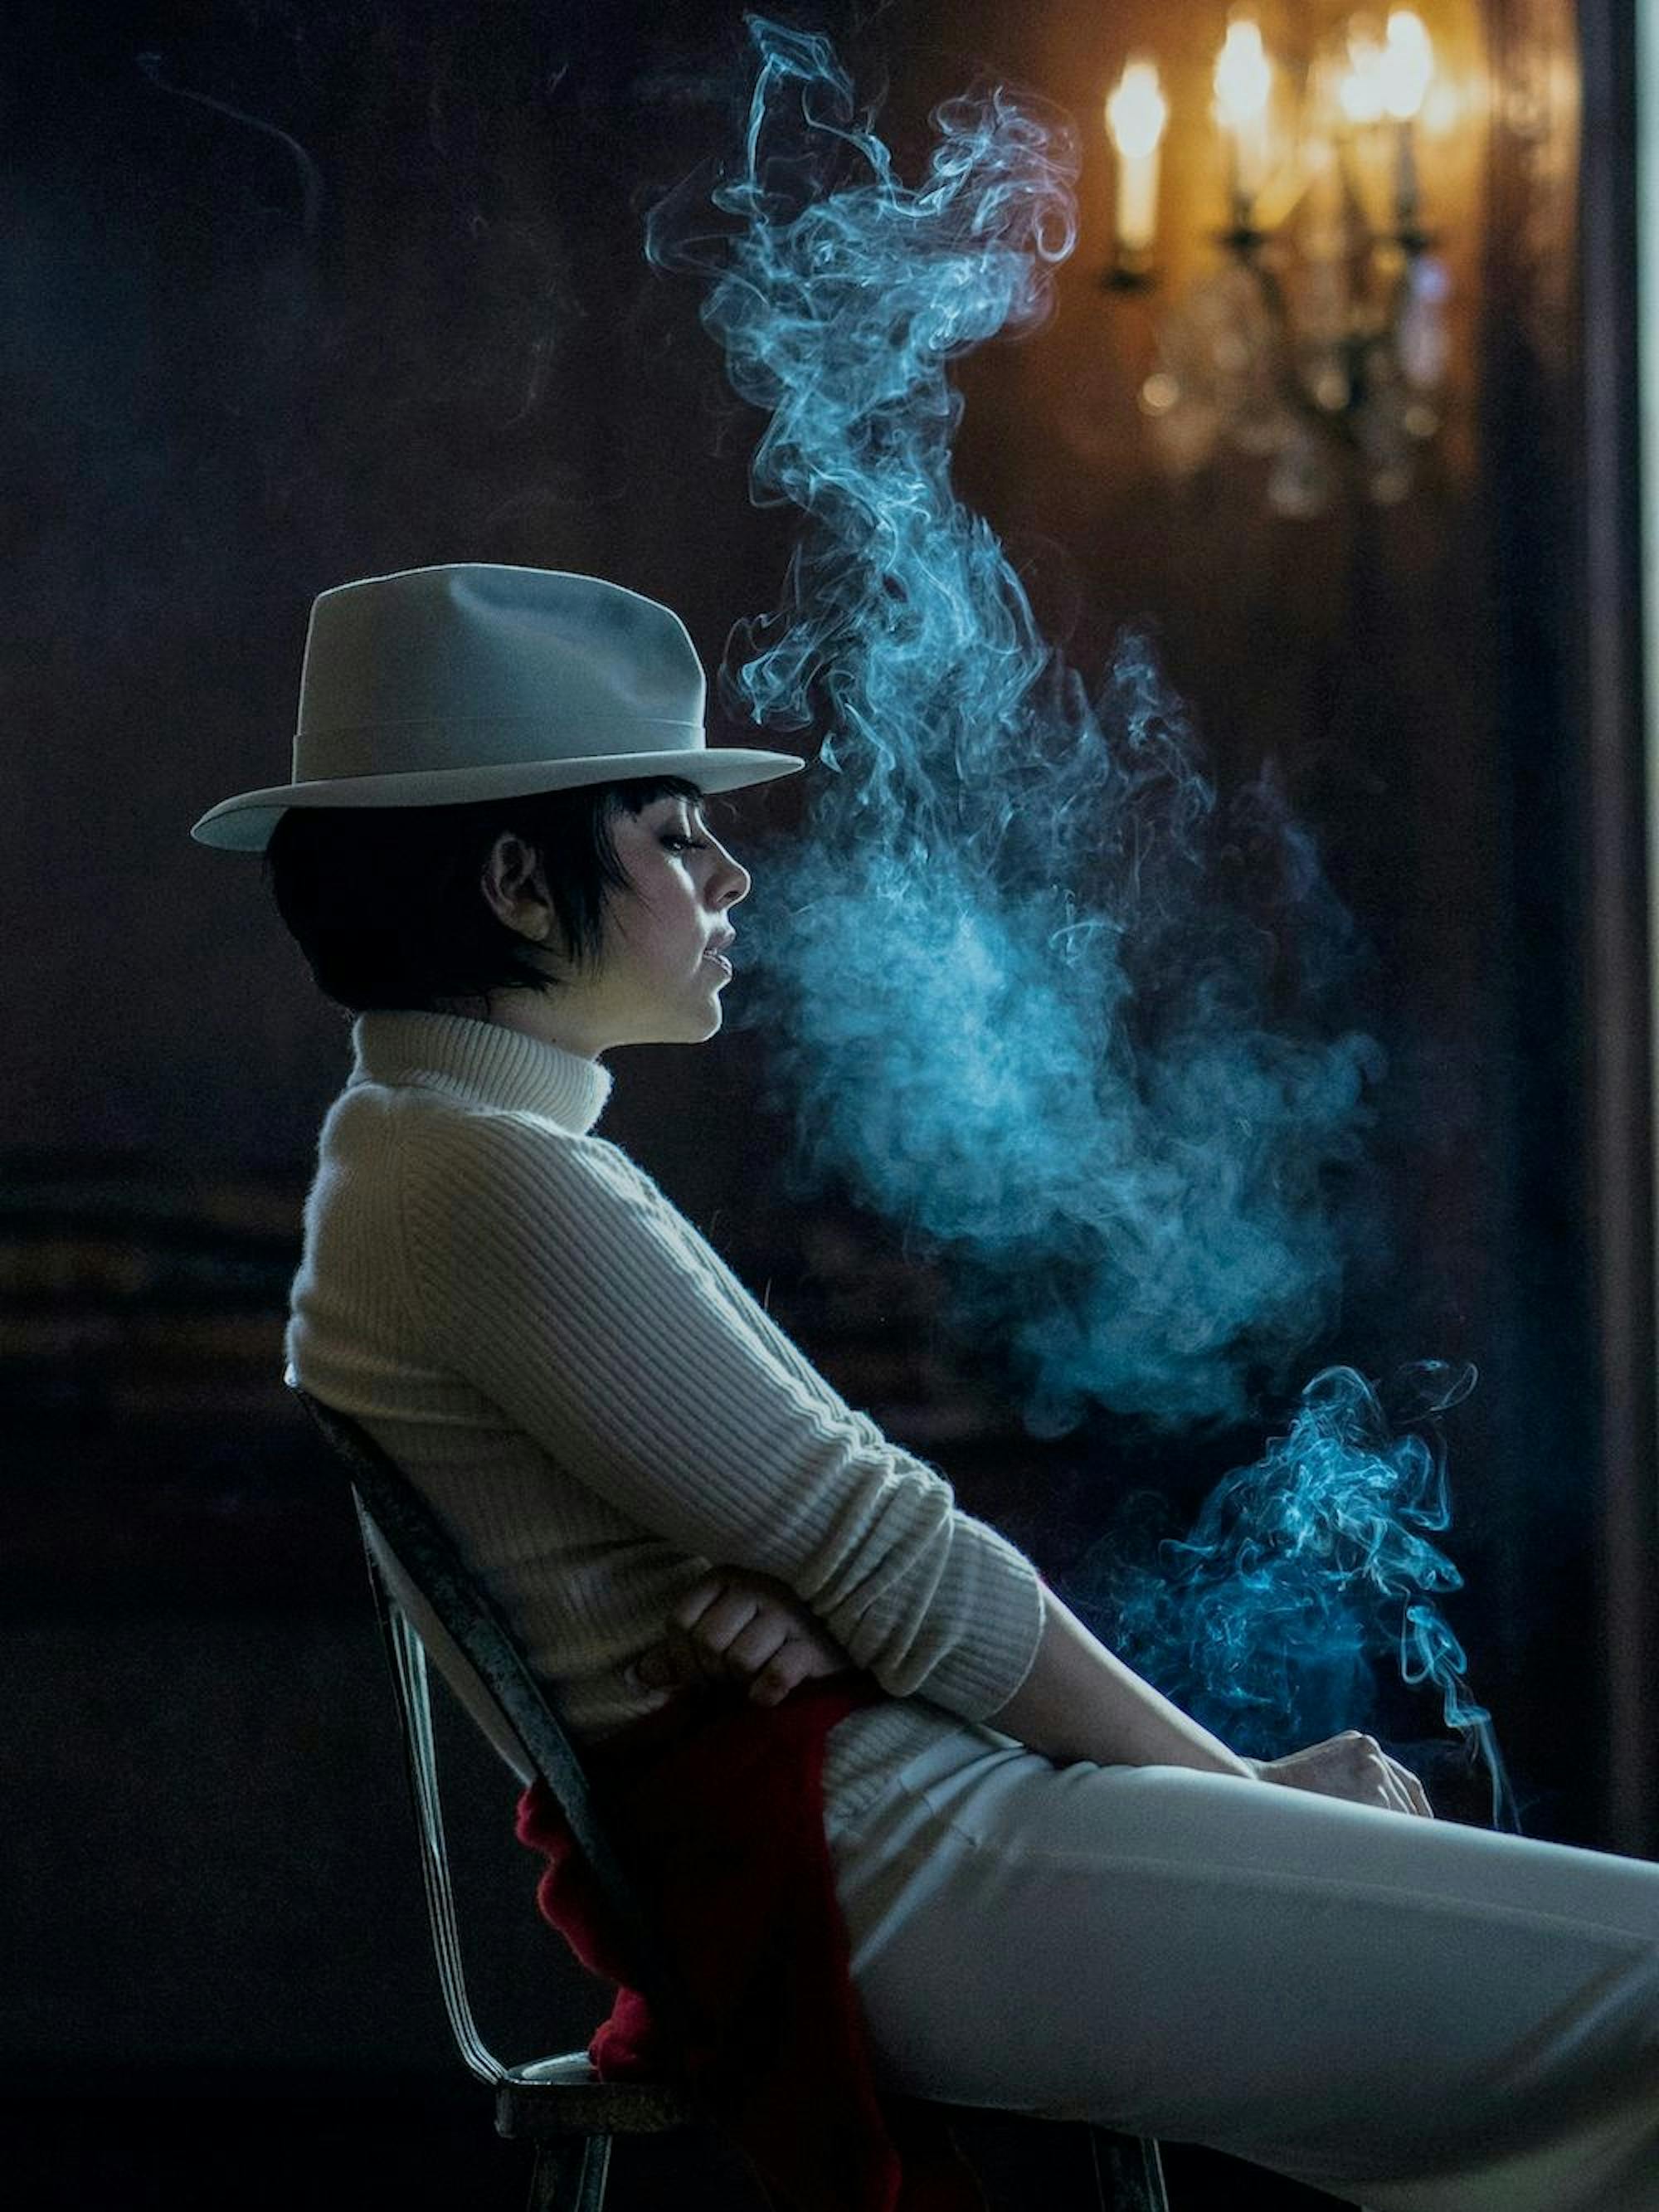 Liza Minnelli (Krysta Rodriguez) leans back in a chair, shrouded by a cloud of her cigarette smoke. She is dressed in all white, included fedora, and the eerie shot is lit only by a light fixture in the background.